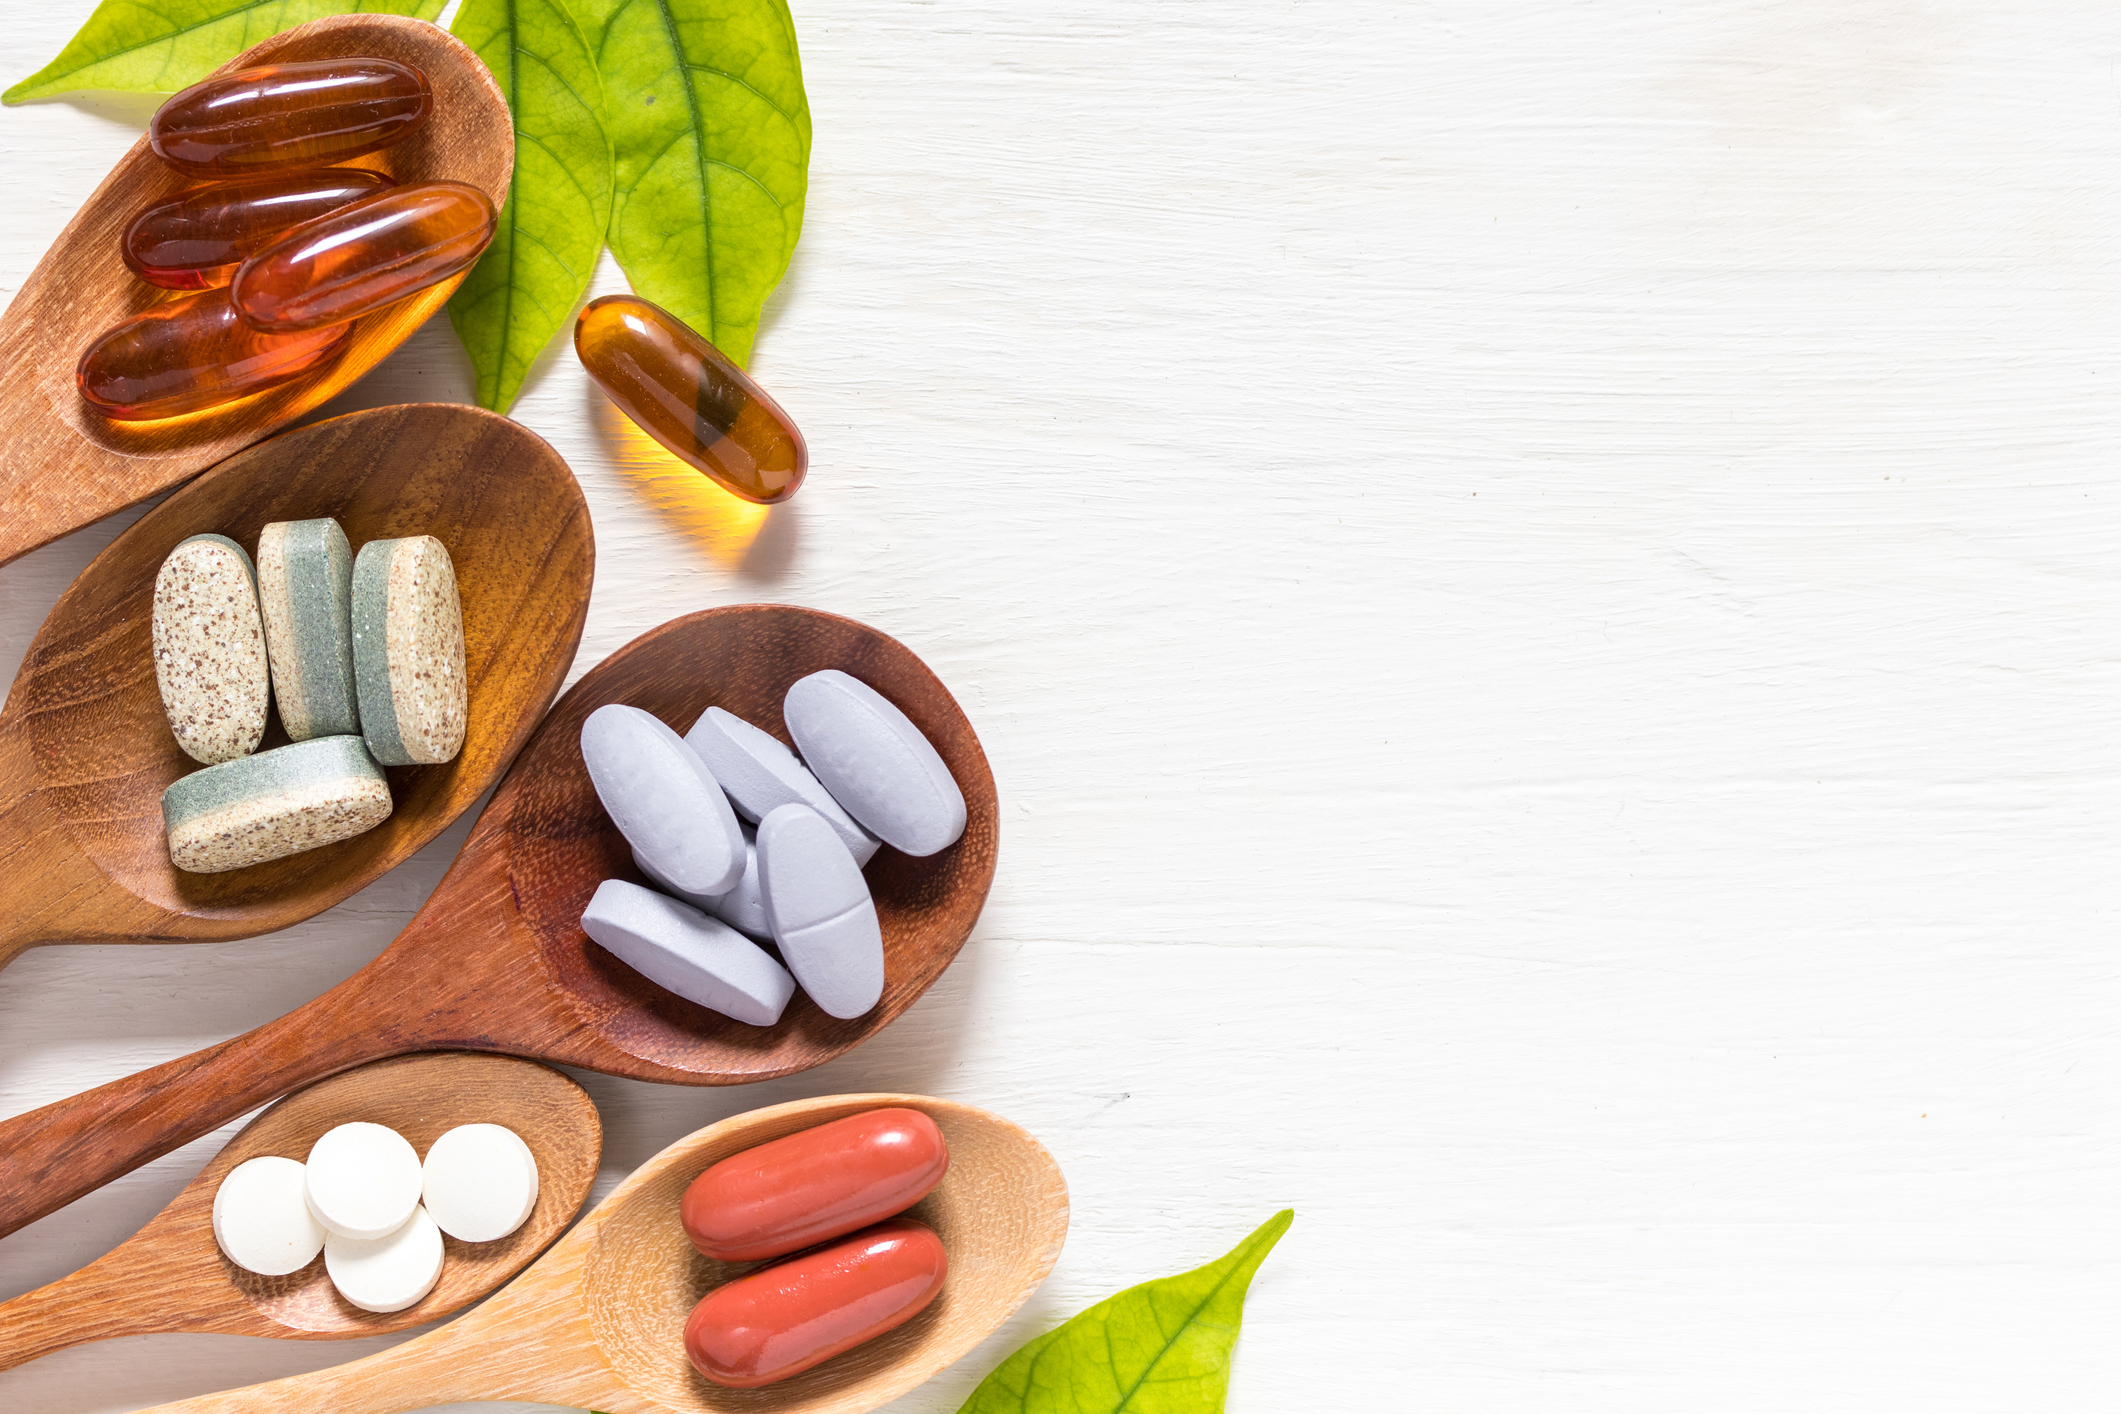 Should You Buy Supplements From Instagram?